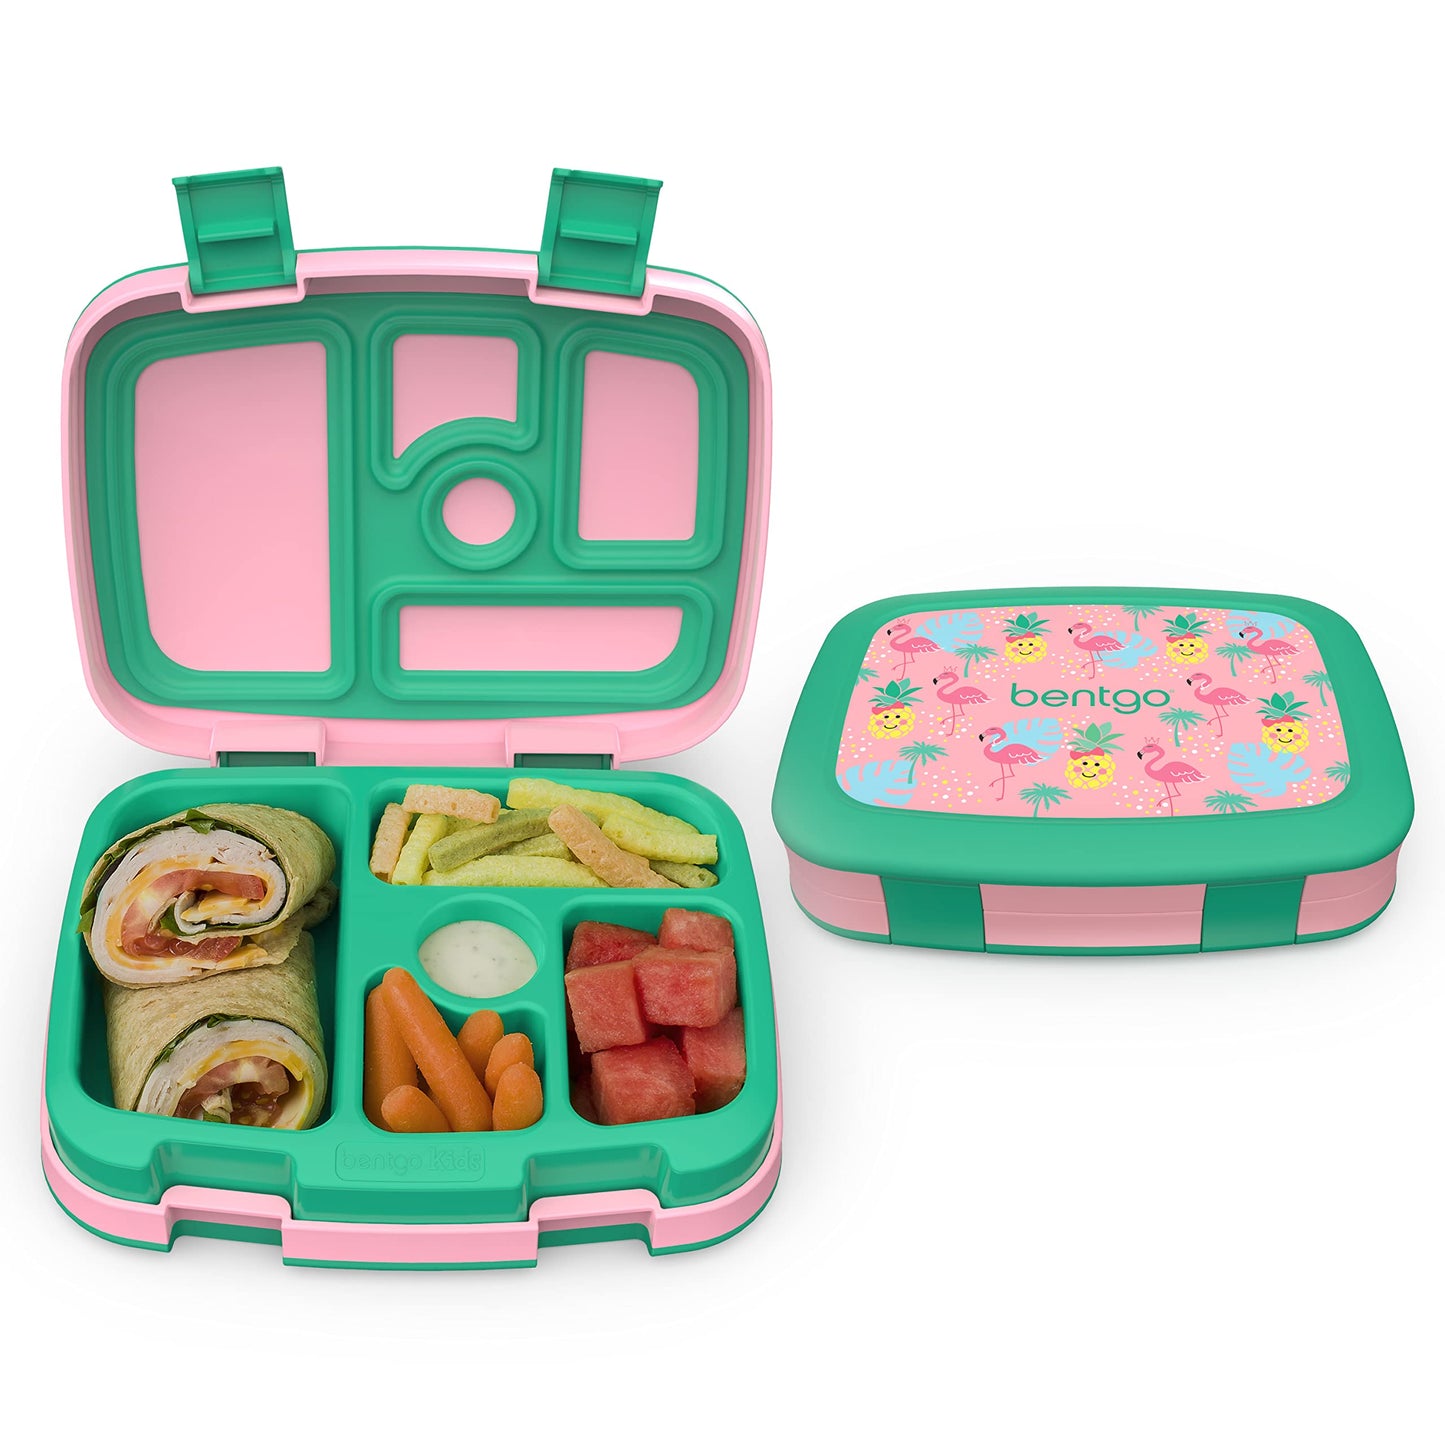 Bentgo® Kids Prints Leak-Proof, 5-Compartment Bento-Style Kids Lunch Box - Ideal Portion Sizes for Ages 3 to 7 - BPA-Free, Dishwasher Safe, Food-Safe Materials - 2023 Collection (Friendly Skies)…